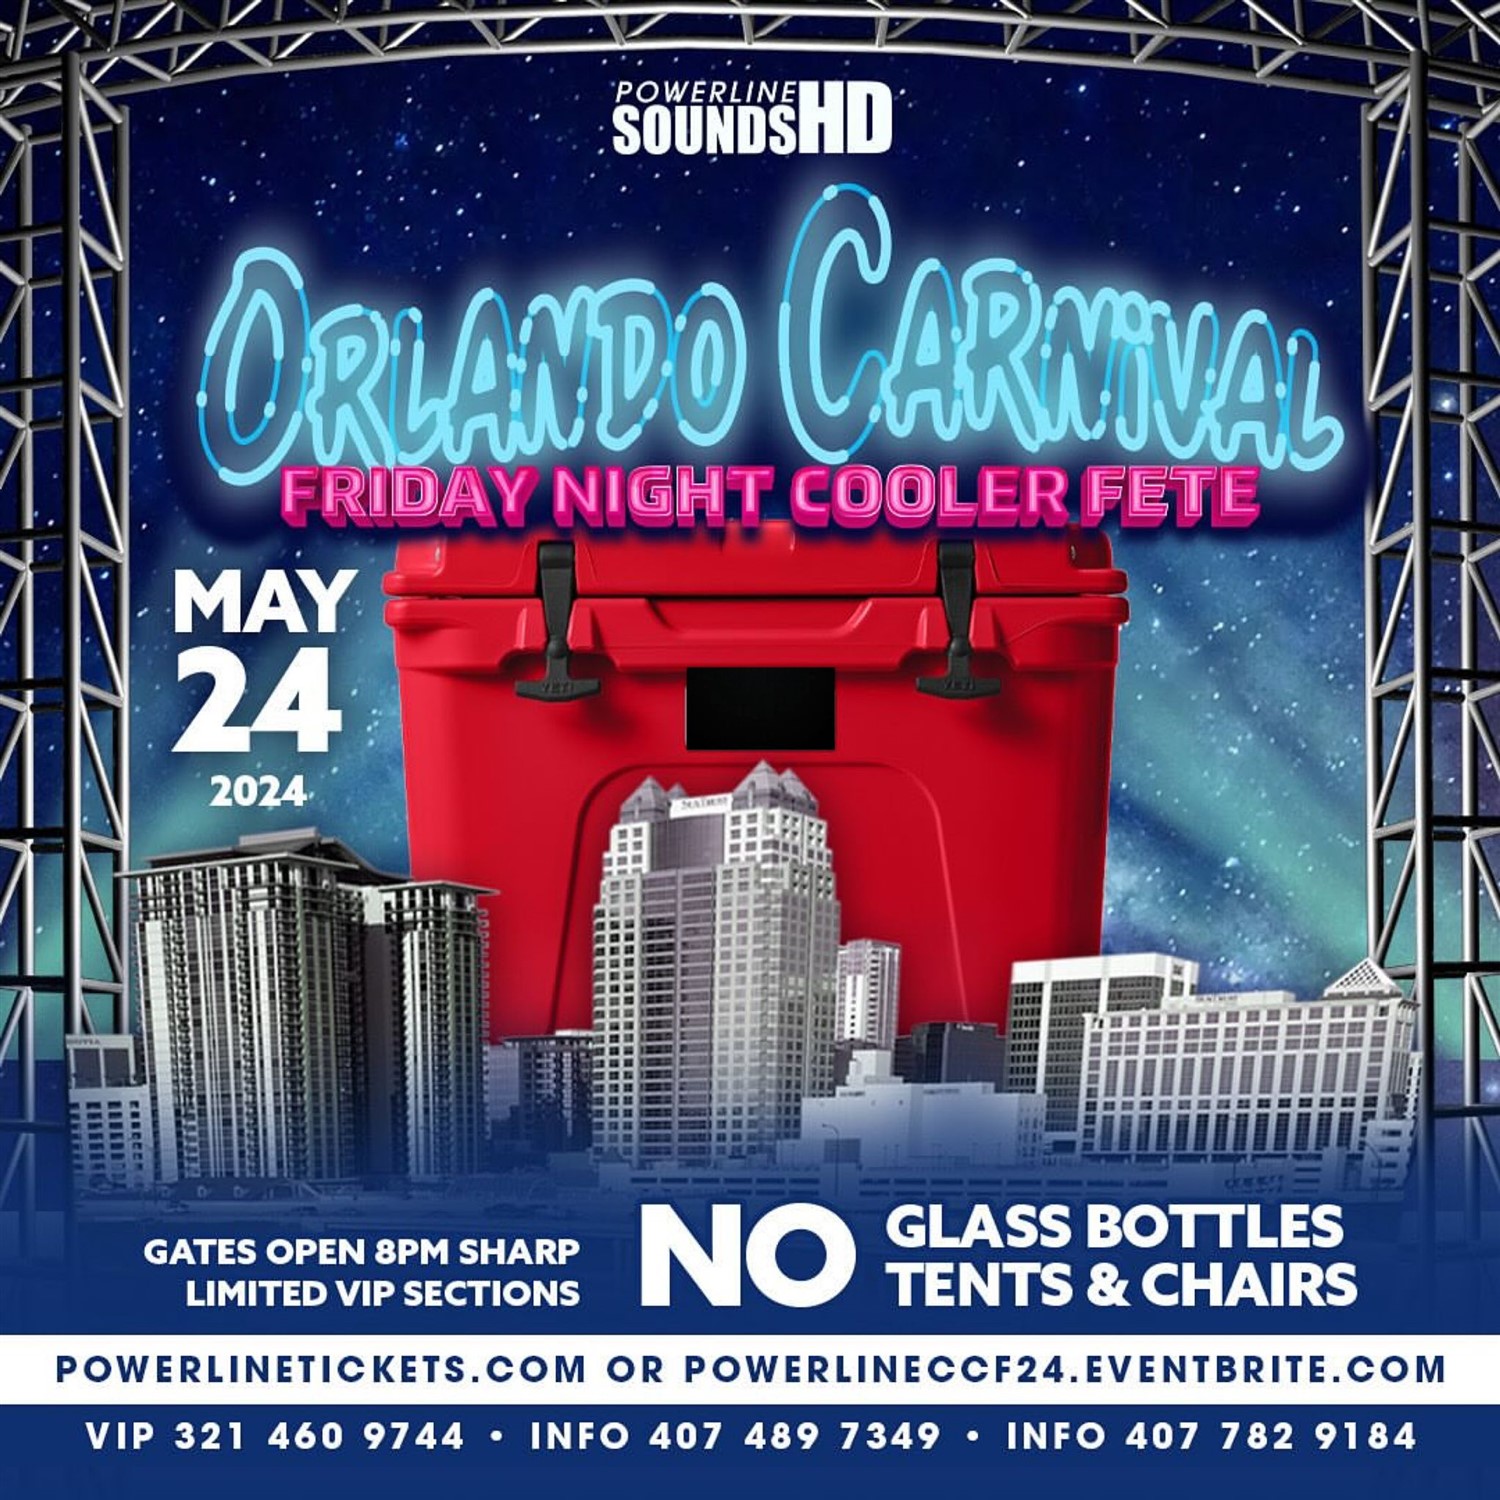 POWERLINE'S 2024 Annual      Orlando Carnival Cooler Fete!! NO GLASS BOTTLES / Gates open @ 8pm / Fete starts @ 9pm on May 24, 20:00@Xperience Live - Buy tickets and Get information on Powerline Sounds HD powerlinetickets.com